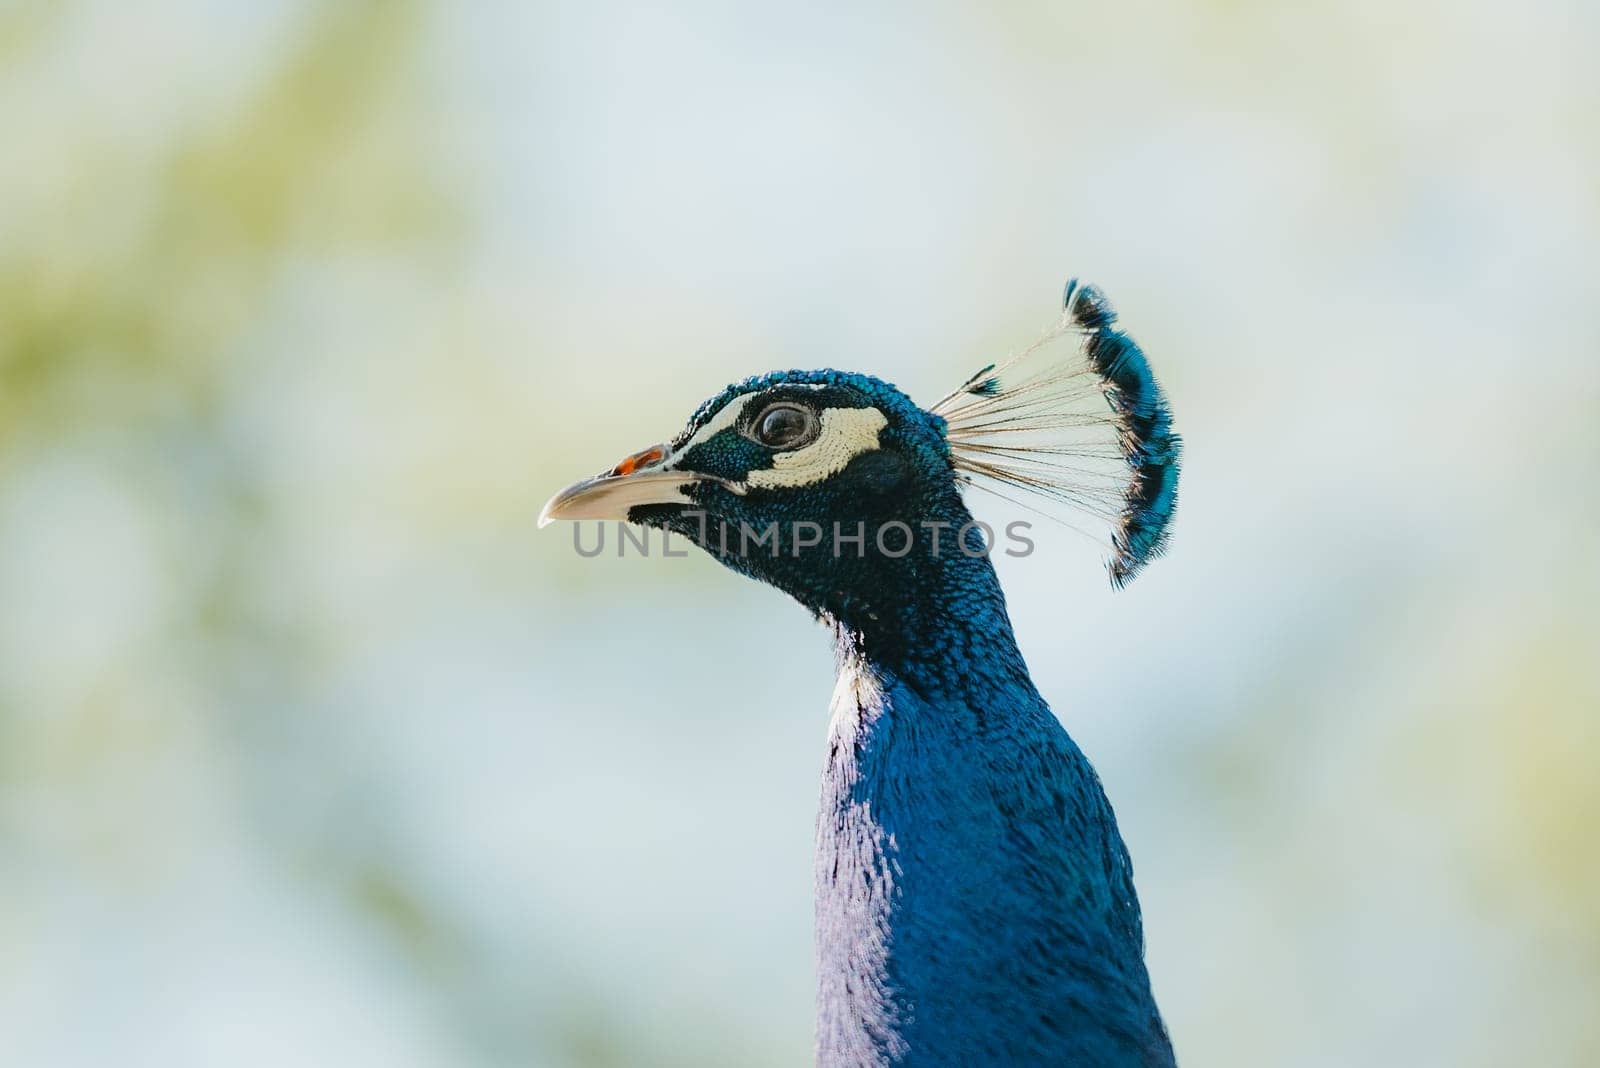 A close portrait of the Indian peafowl which is walking in the park in the morning. The common peacock in the forest.